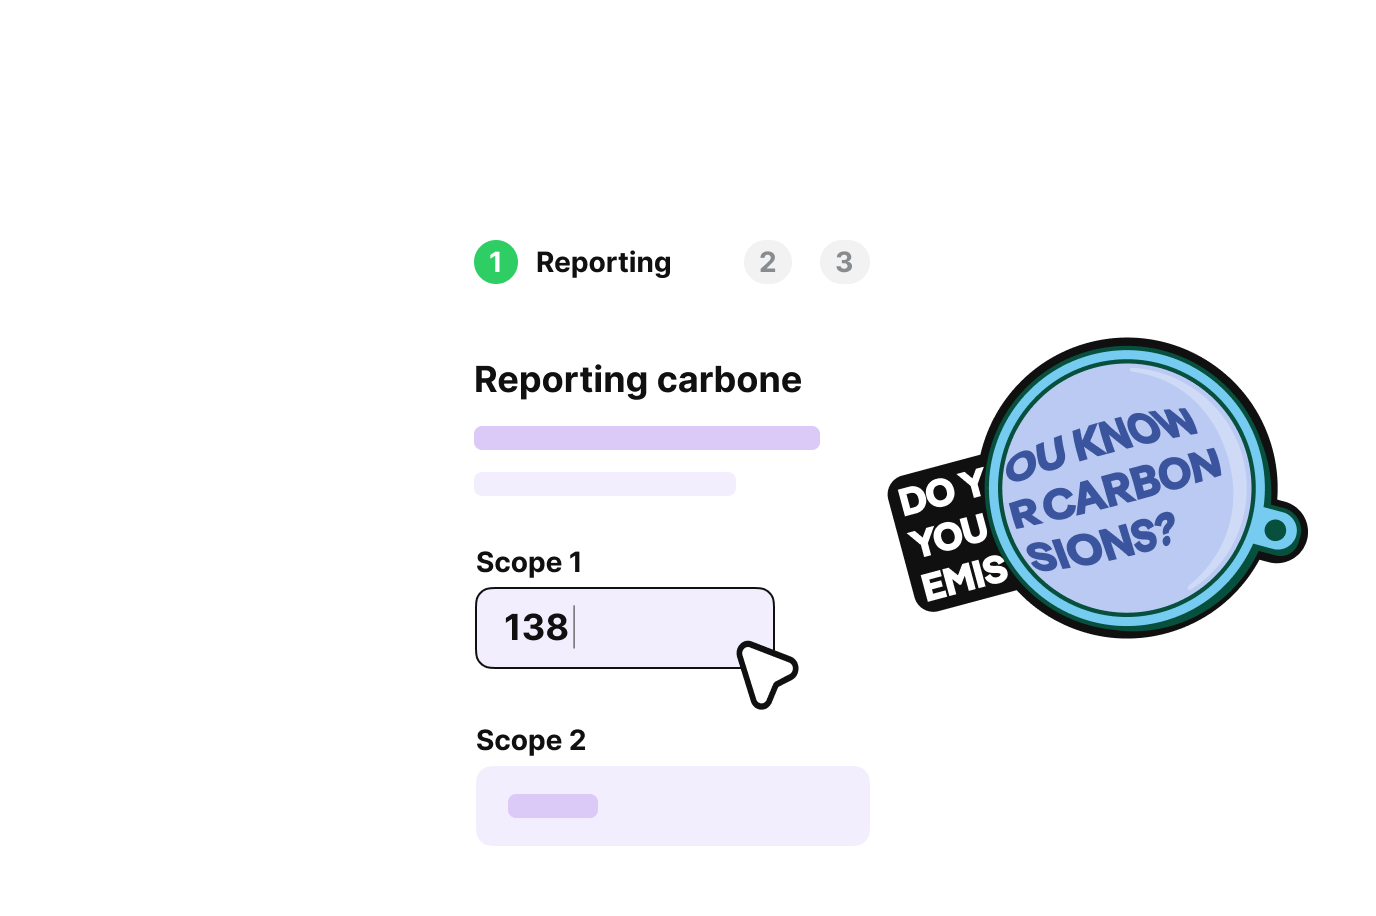 Animation "reporting carbone"